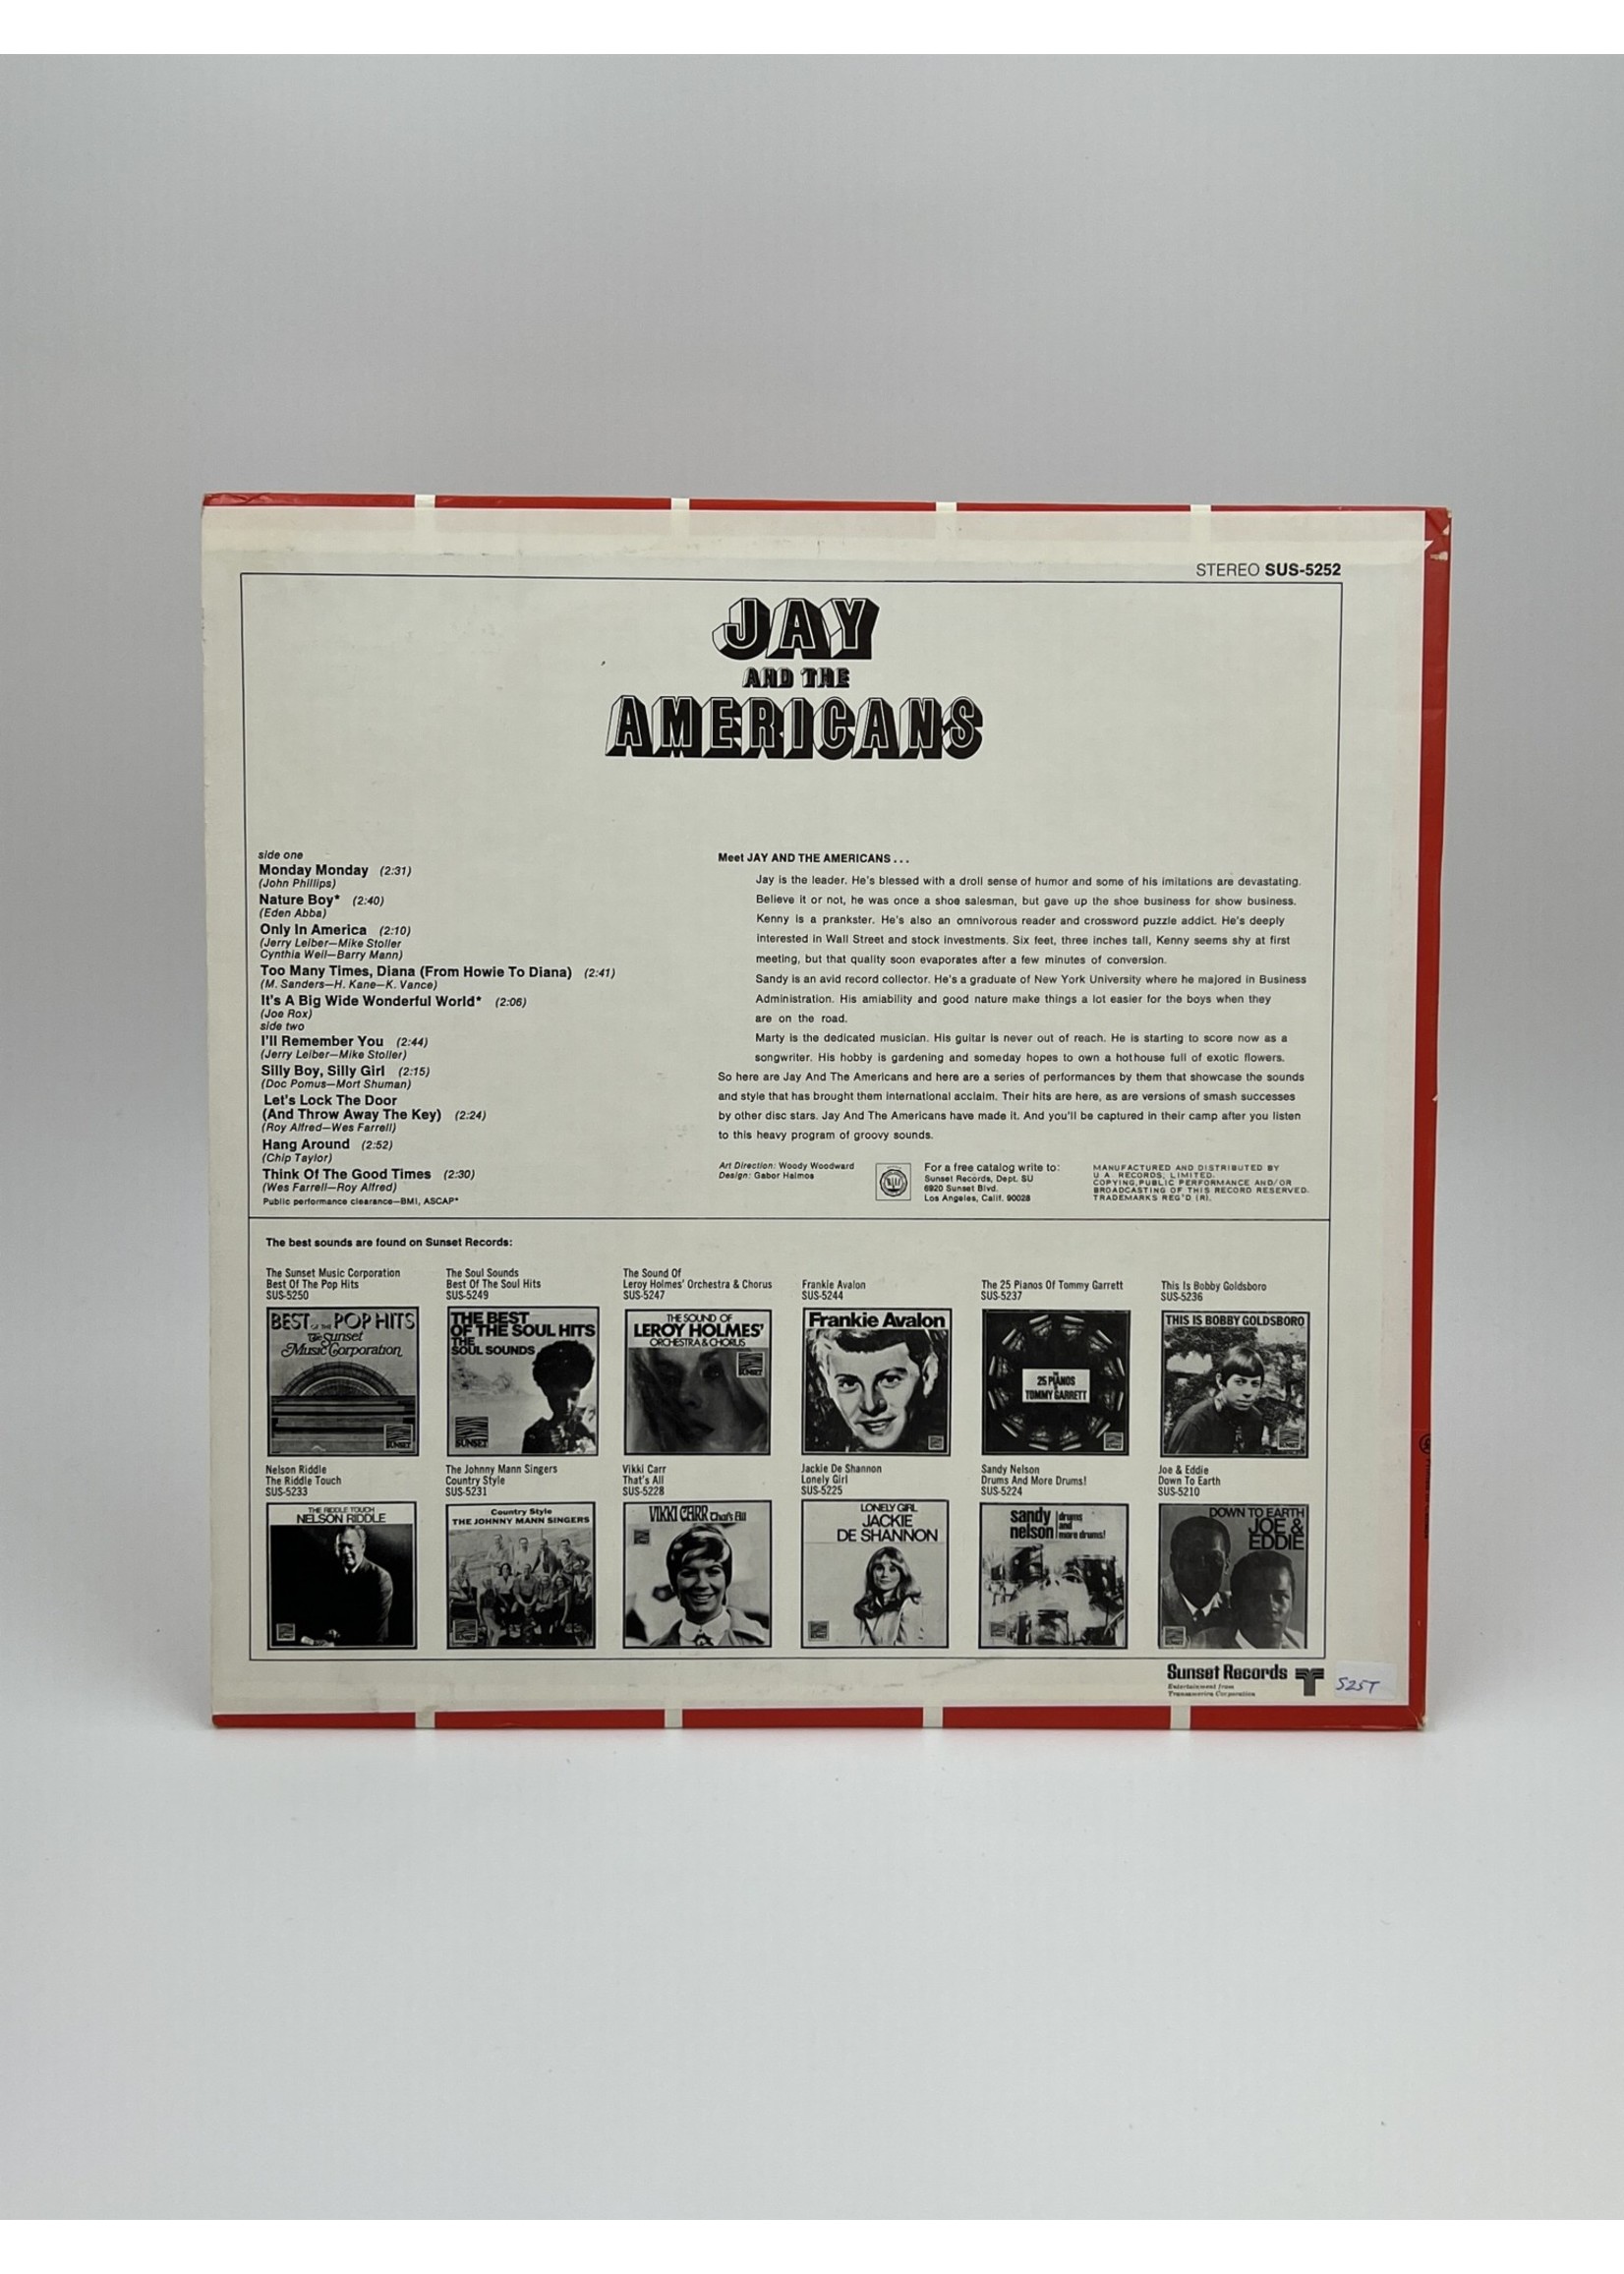 LP Jay and the Americans LP Record